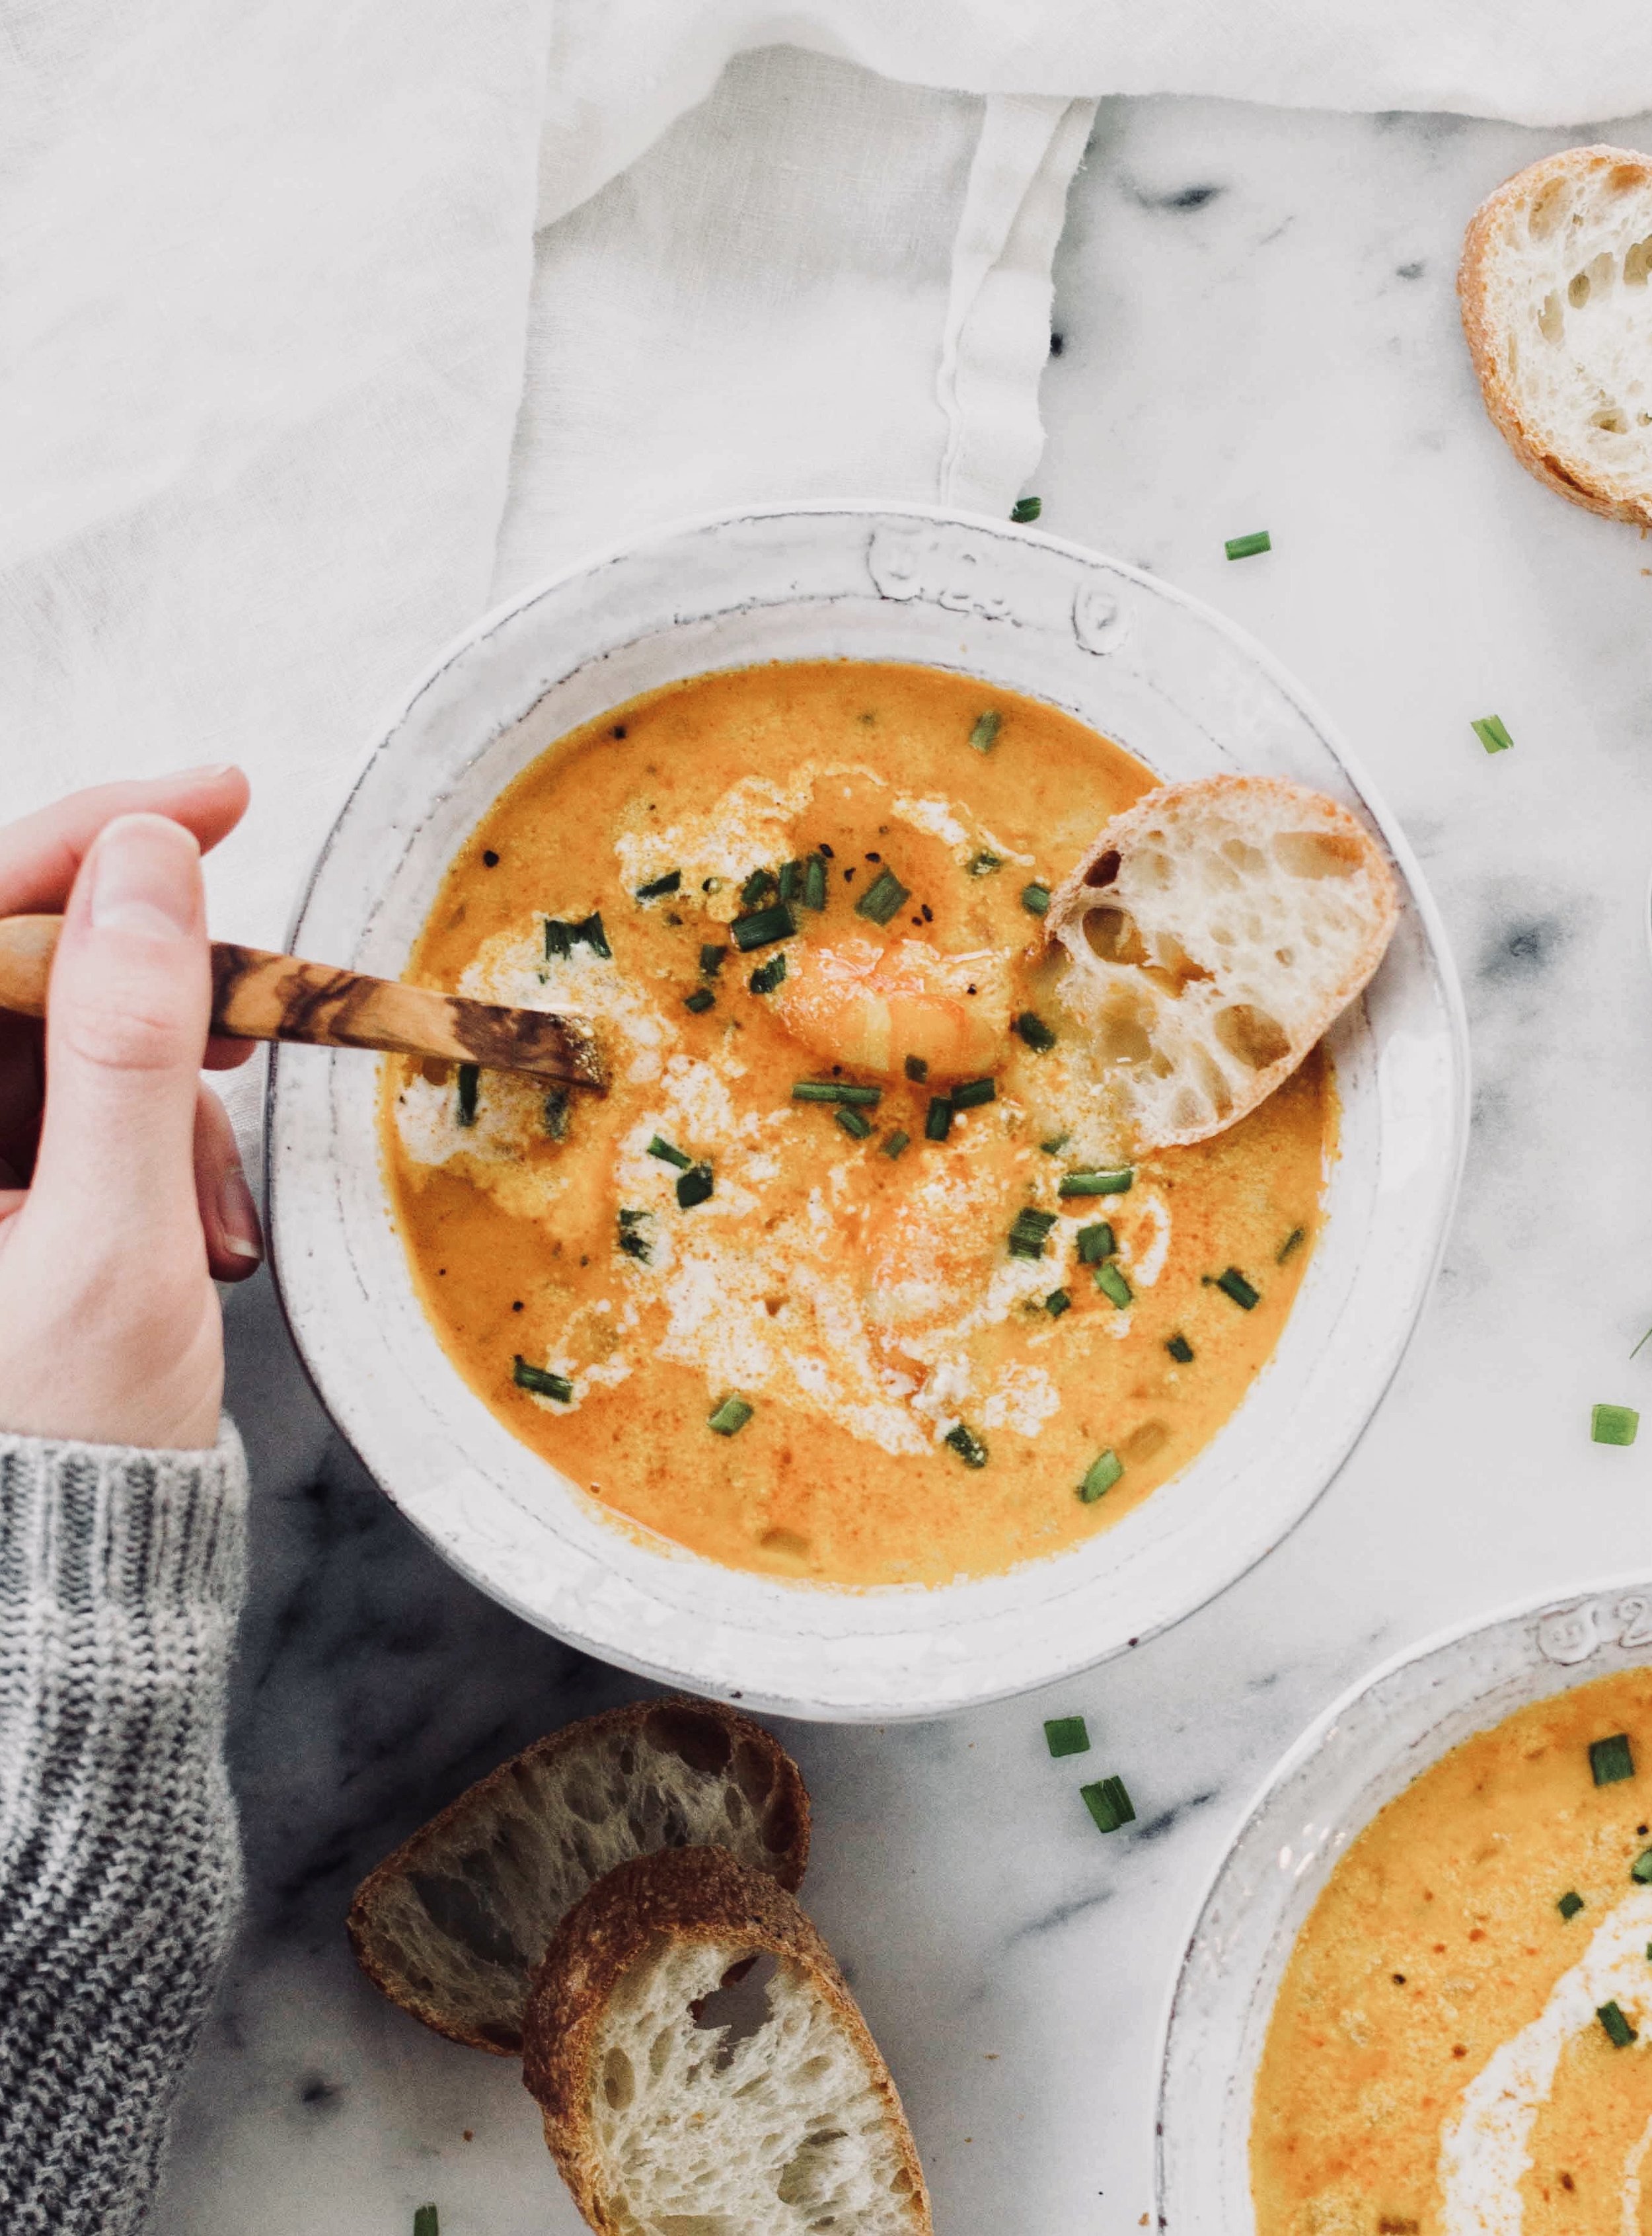 Icelandic Creamy Langoustine Recipe - Creamy Lobster Bisque Perfect For Warming Up On Cold Winter Days - The Well Essentials